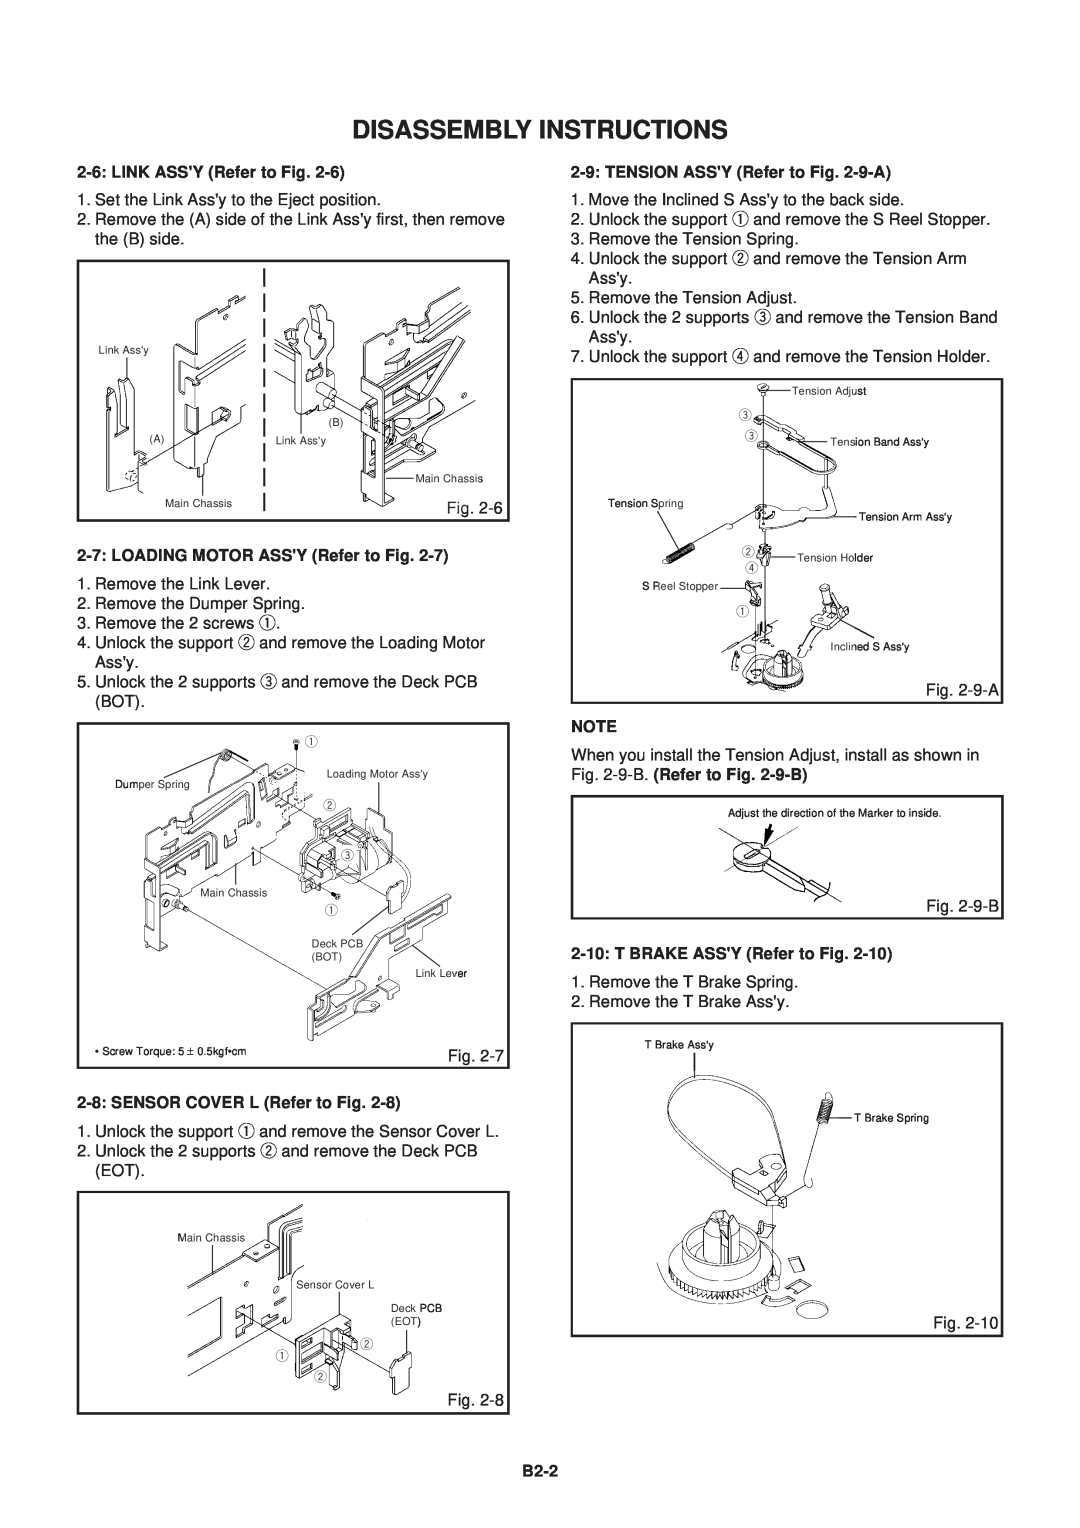 Aiwa HV-FX5100 Disassembly Instructions, LINK ASSY Refer to Fig, TENSION ASSY Refer to -9-A, SENSOR COVER L Refer to Fig 